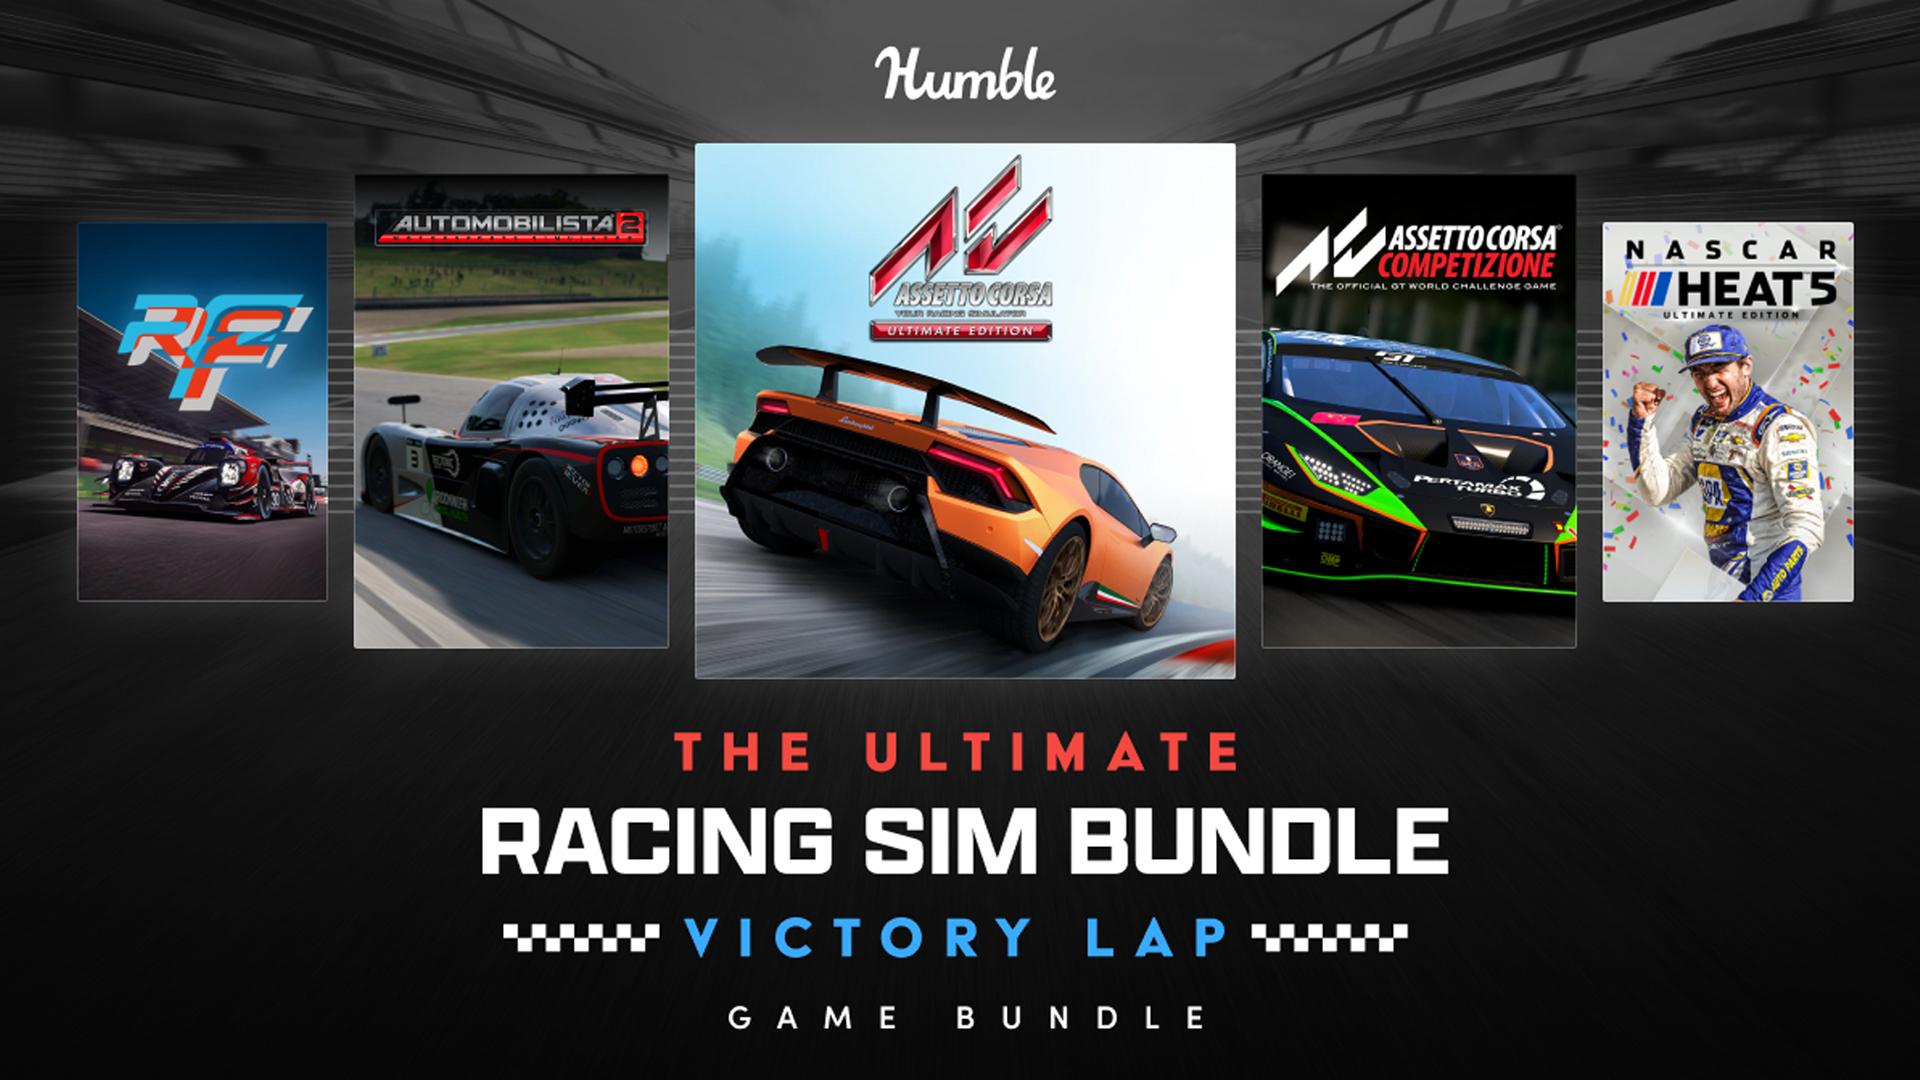 Humble Bundle takes a Victory Lap with the return of The Ultimate Racing  Sim Bundle